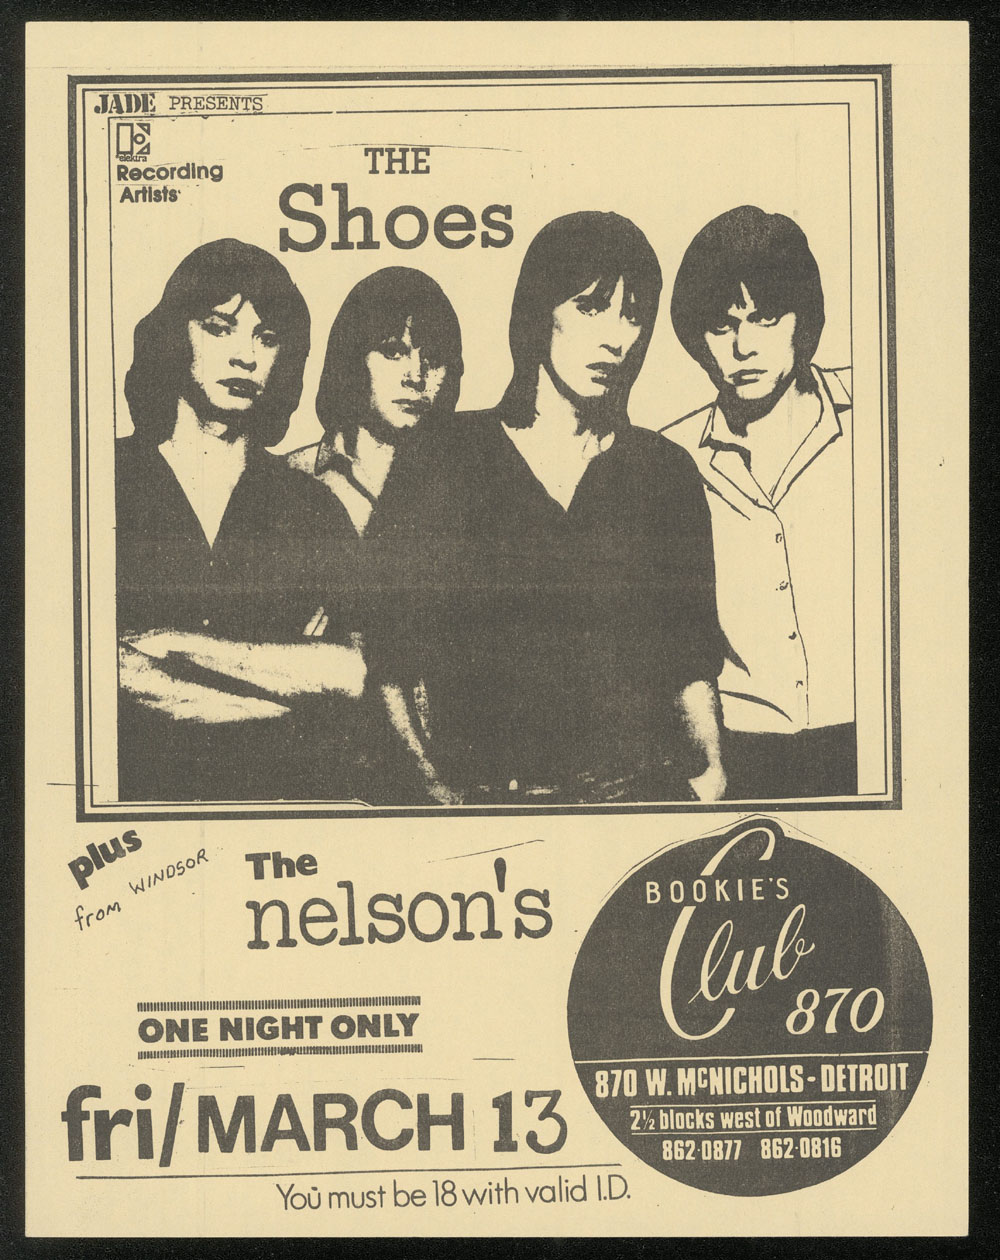 SHOES at Bookie's Club 870